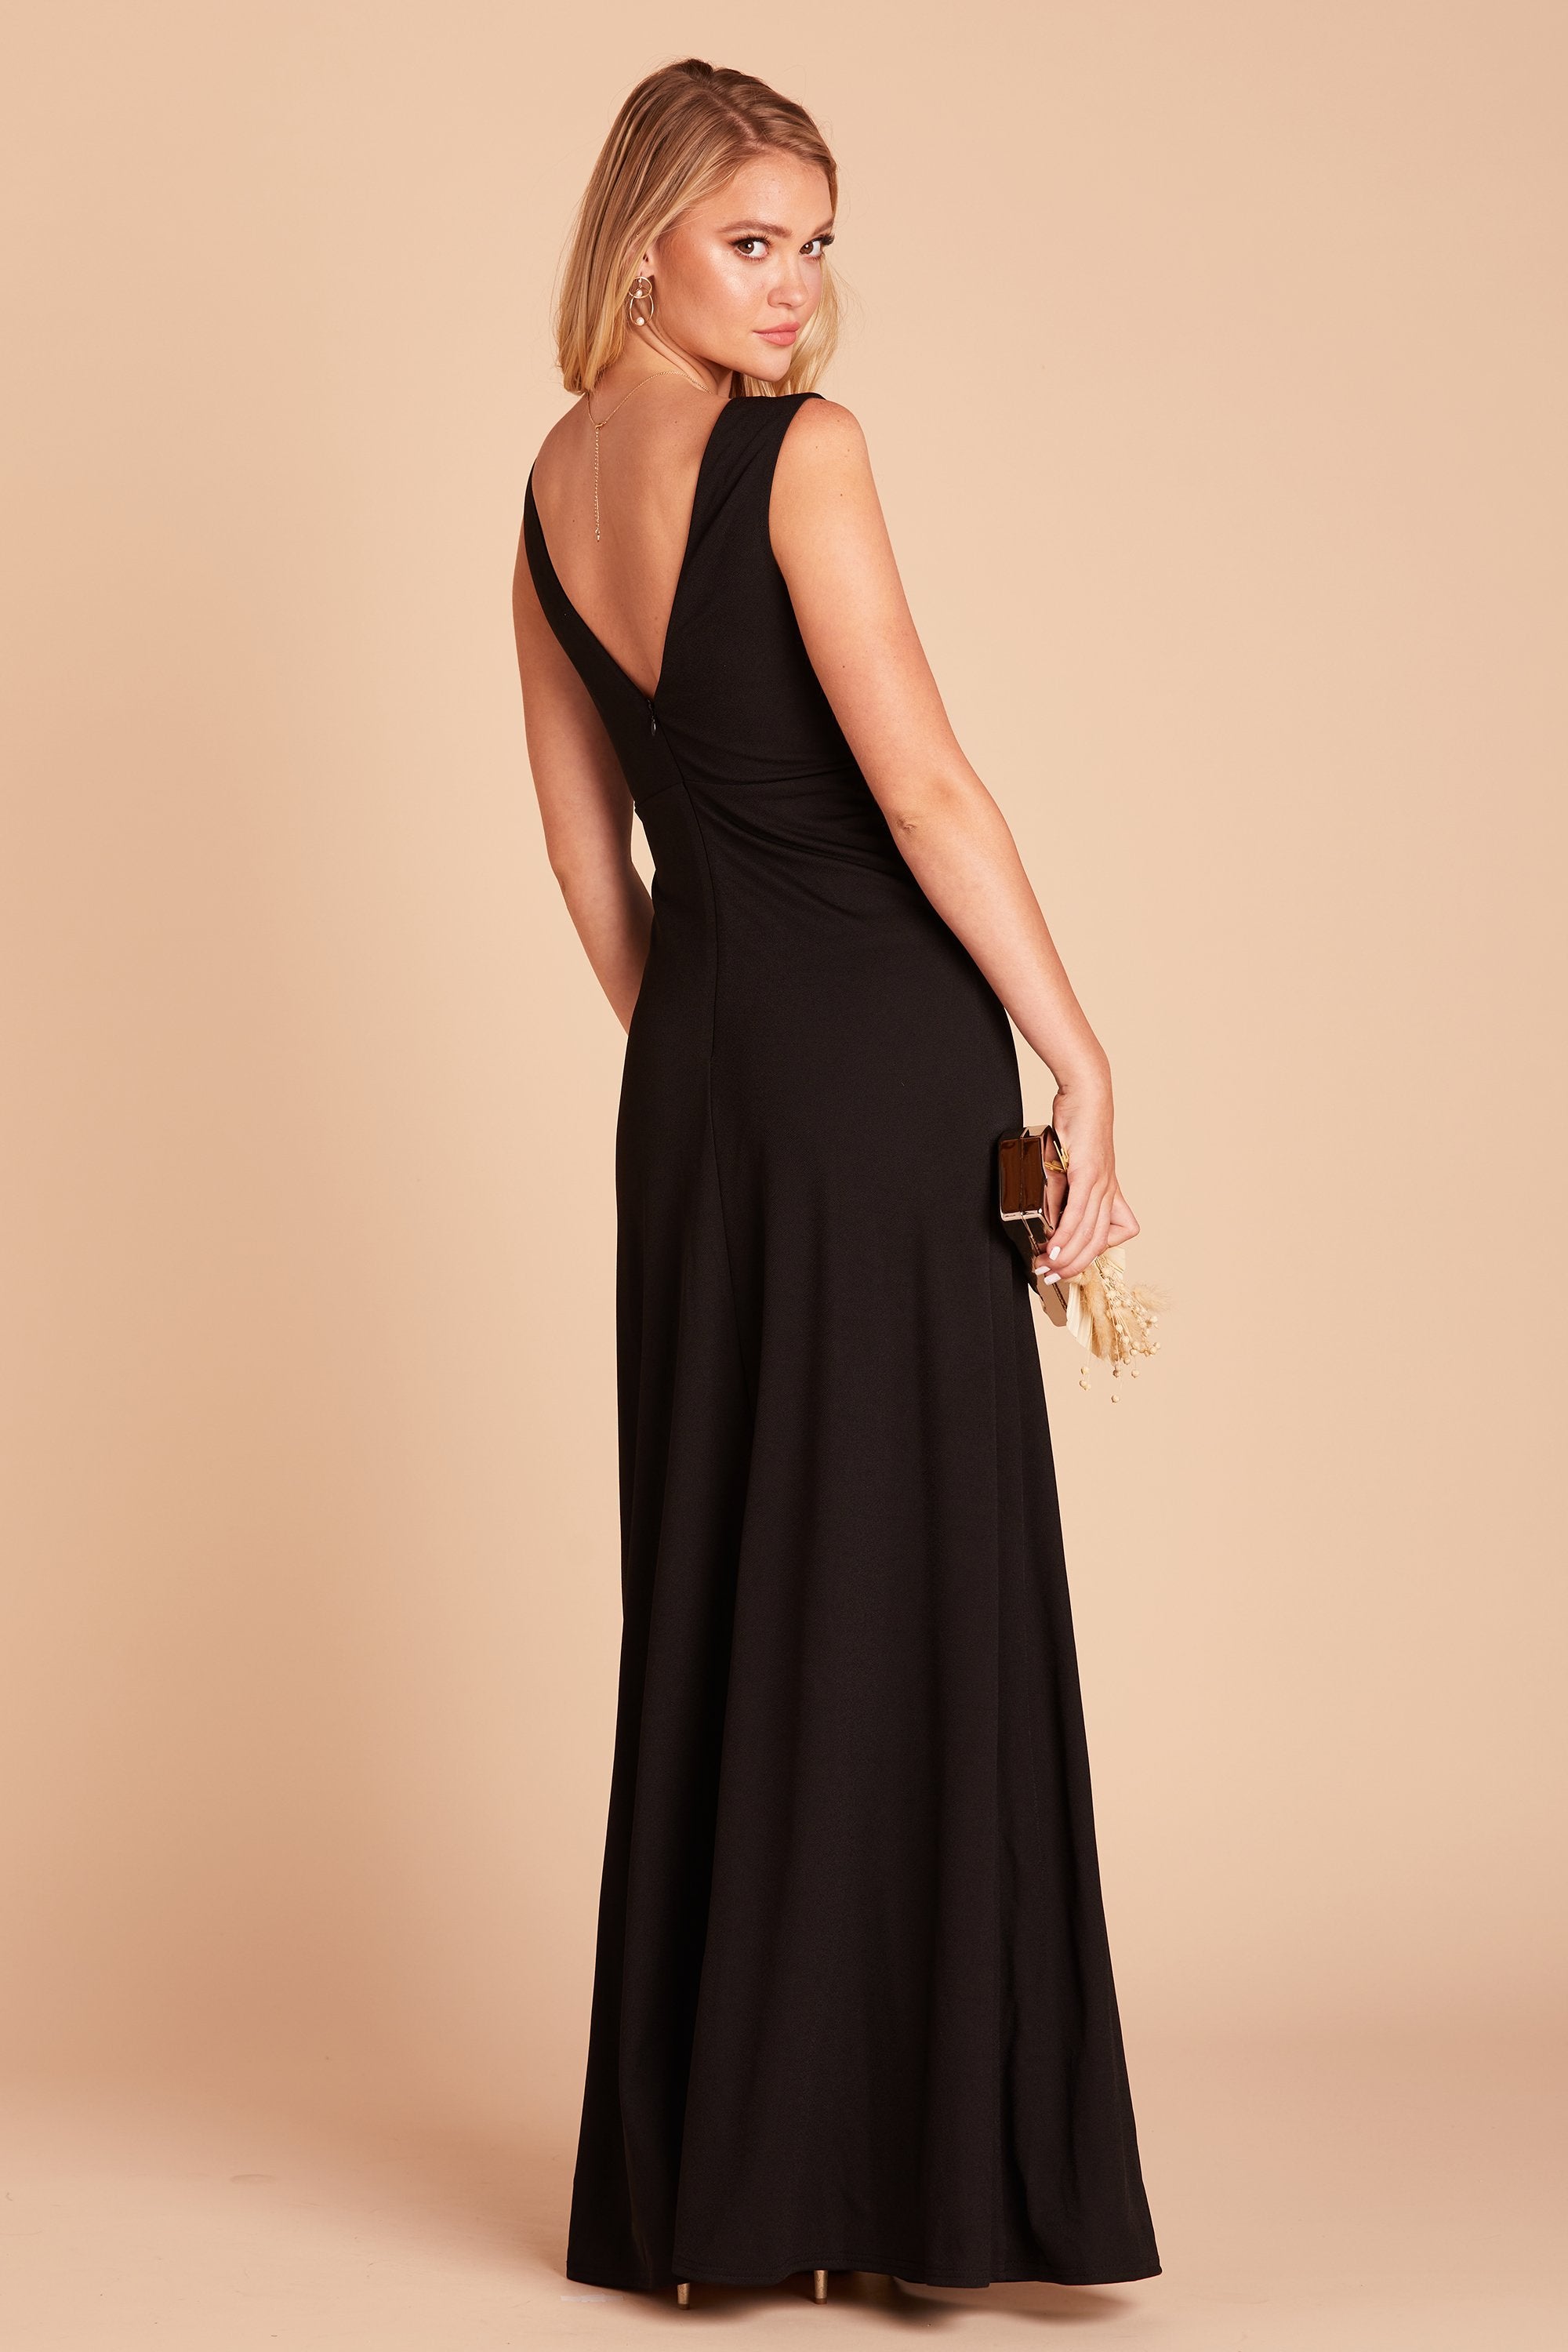 Shamin bridesmaid dress in black crepe by Birdy Grey, side view